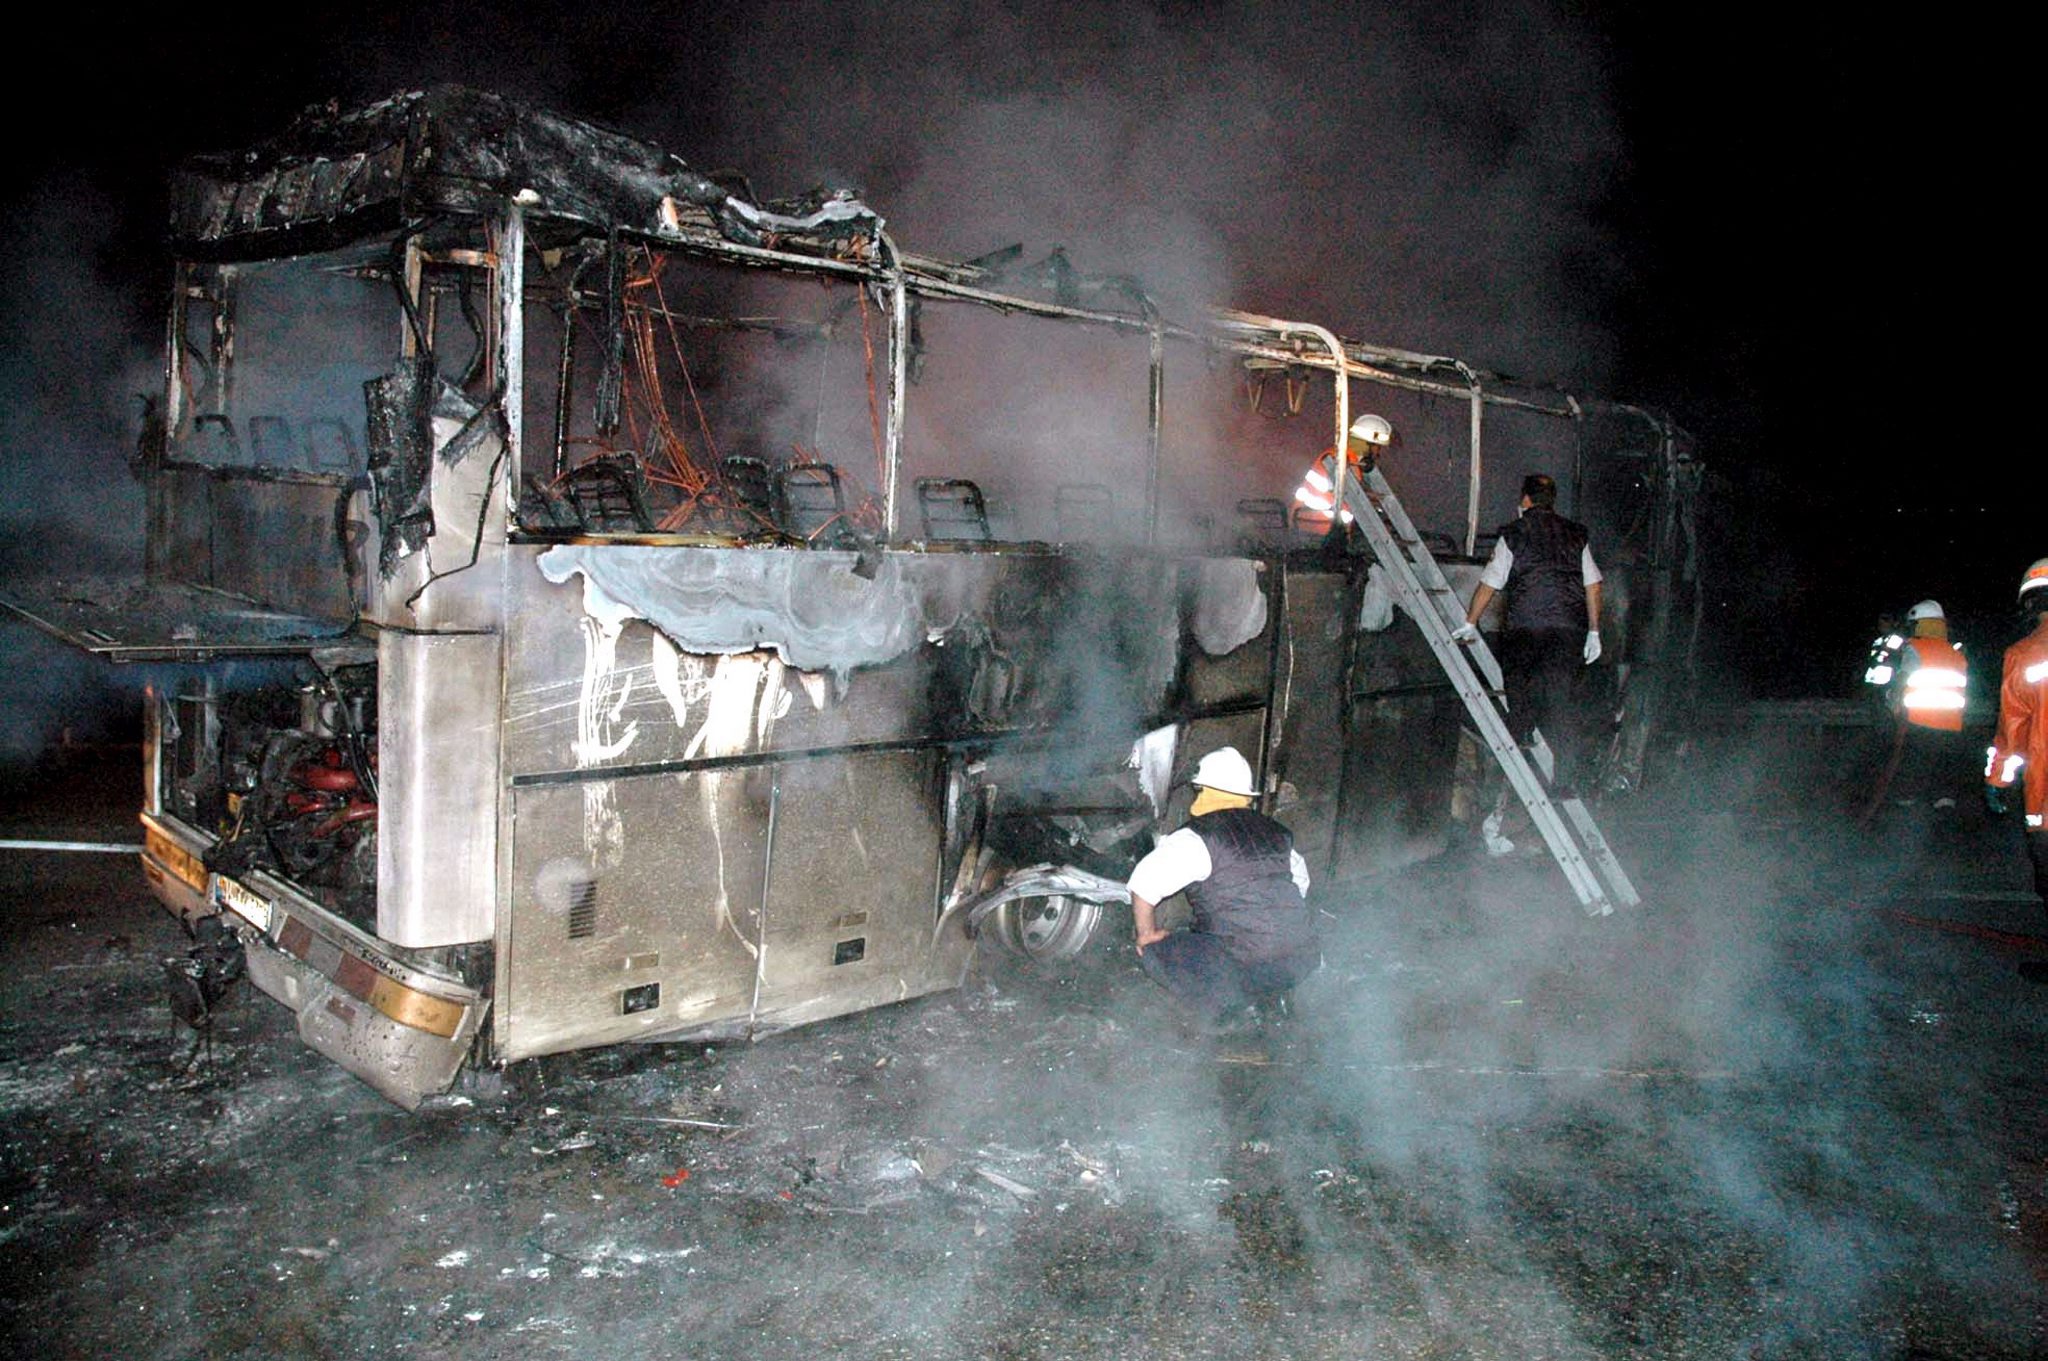 TURCHIA: INCENDIO BUS VICINO A ISTAMBUL - Turkish fireman inspect the burned bus which hit abarrier at the higway  in Sakarya, near Istanbul, on Wednesday, 07 September 2005. 13 people died, 31 people were wounded in this accident.  ANSA /AHMET CILECY /JI